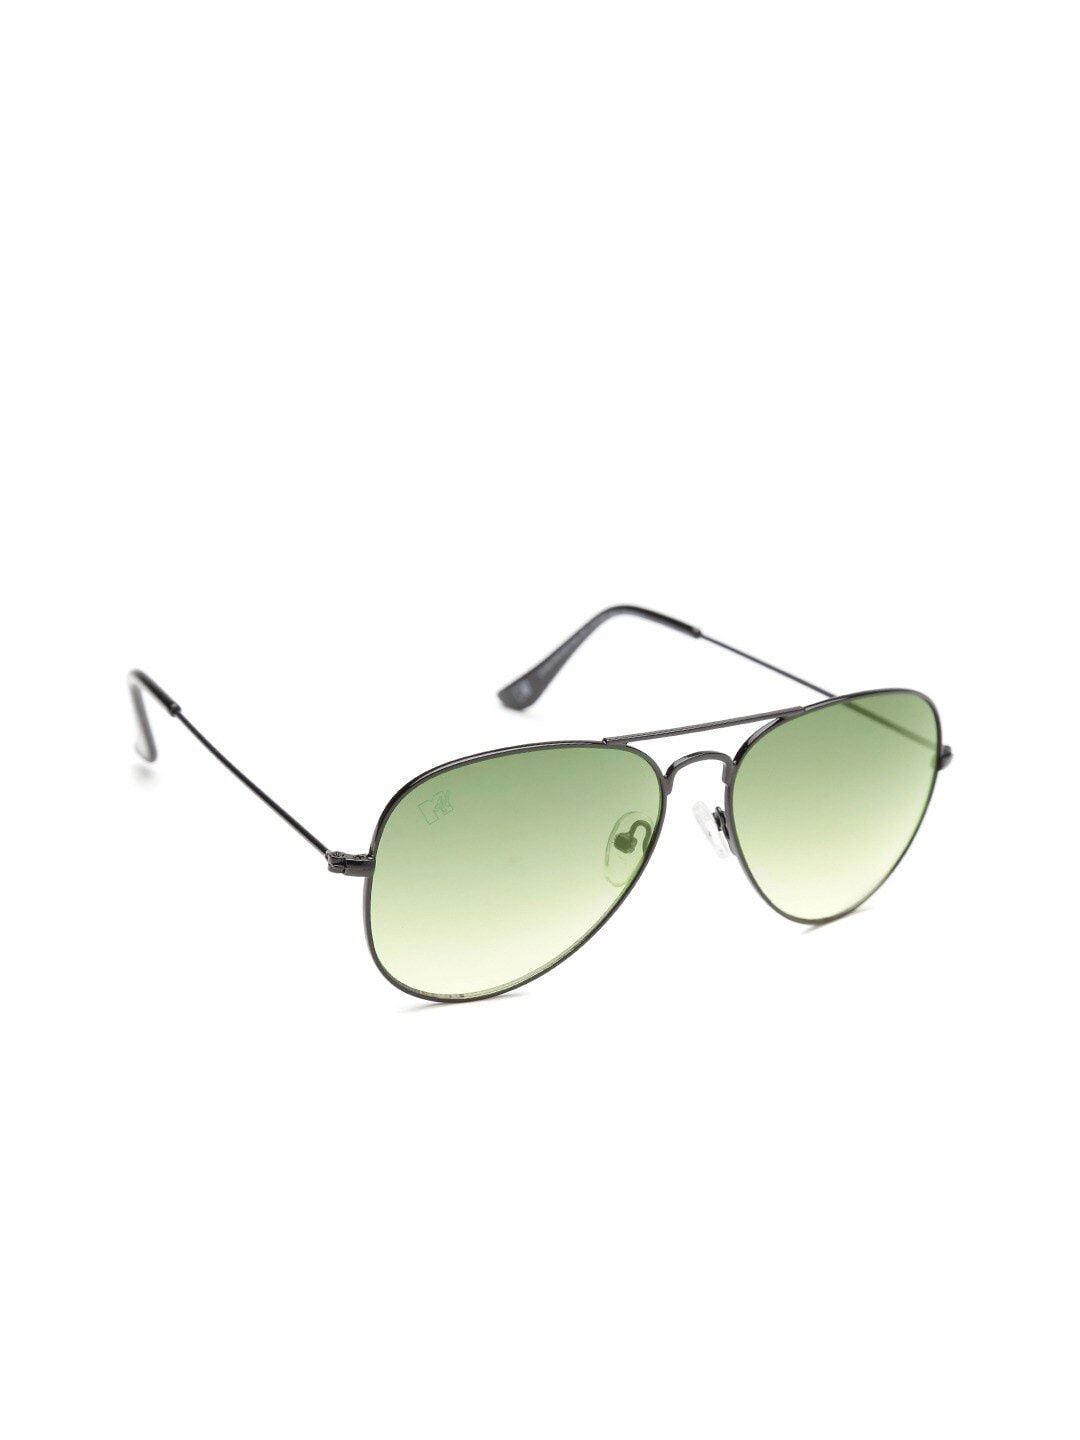 MTV Unisex Green Lens & Black Aviator Sunglasses with UV Protected Lens Price in India